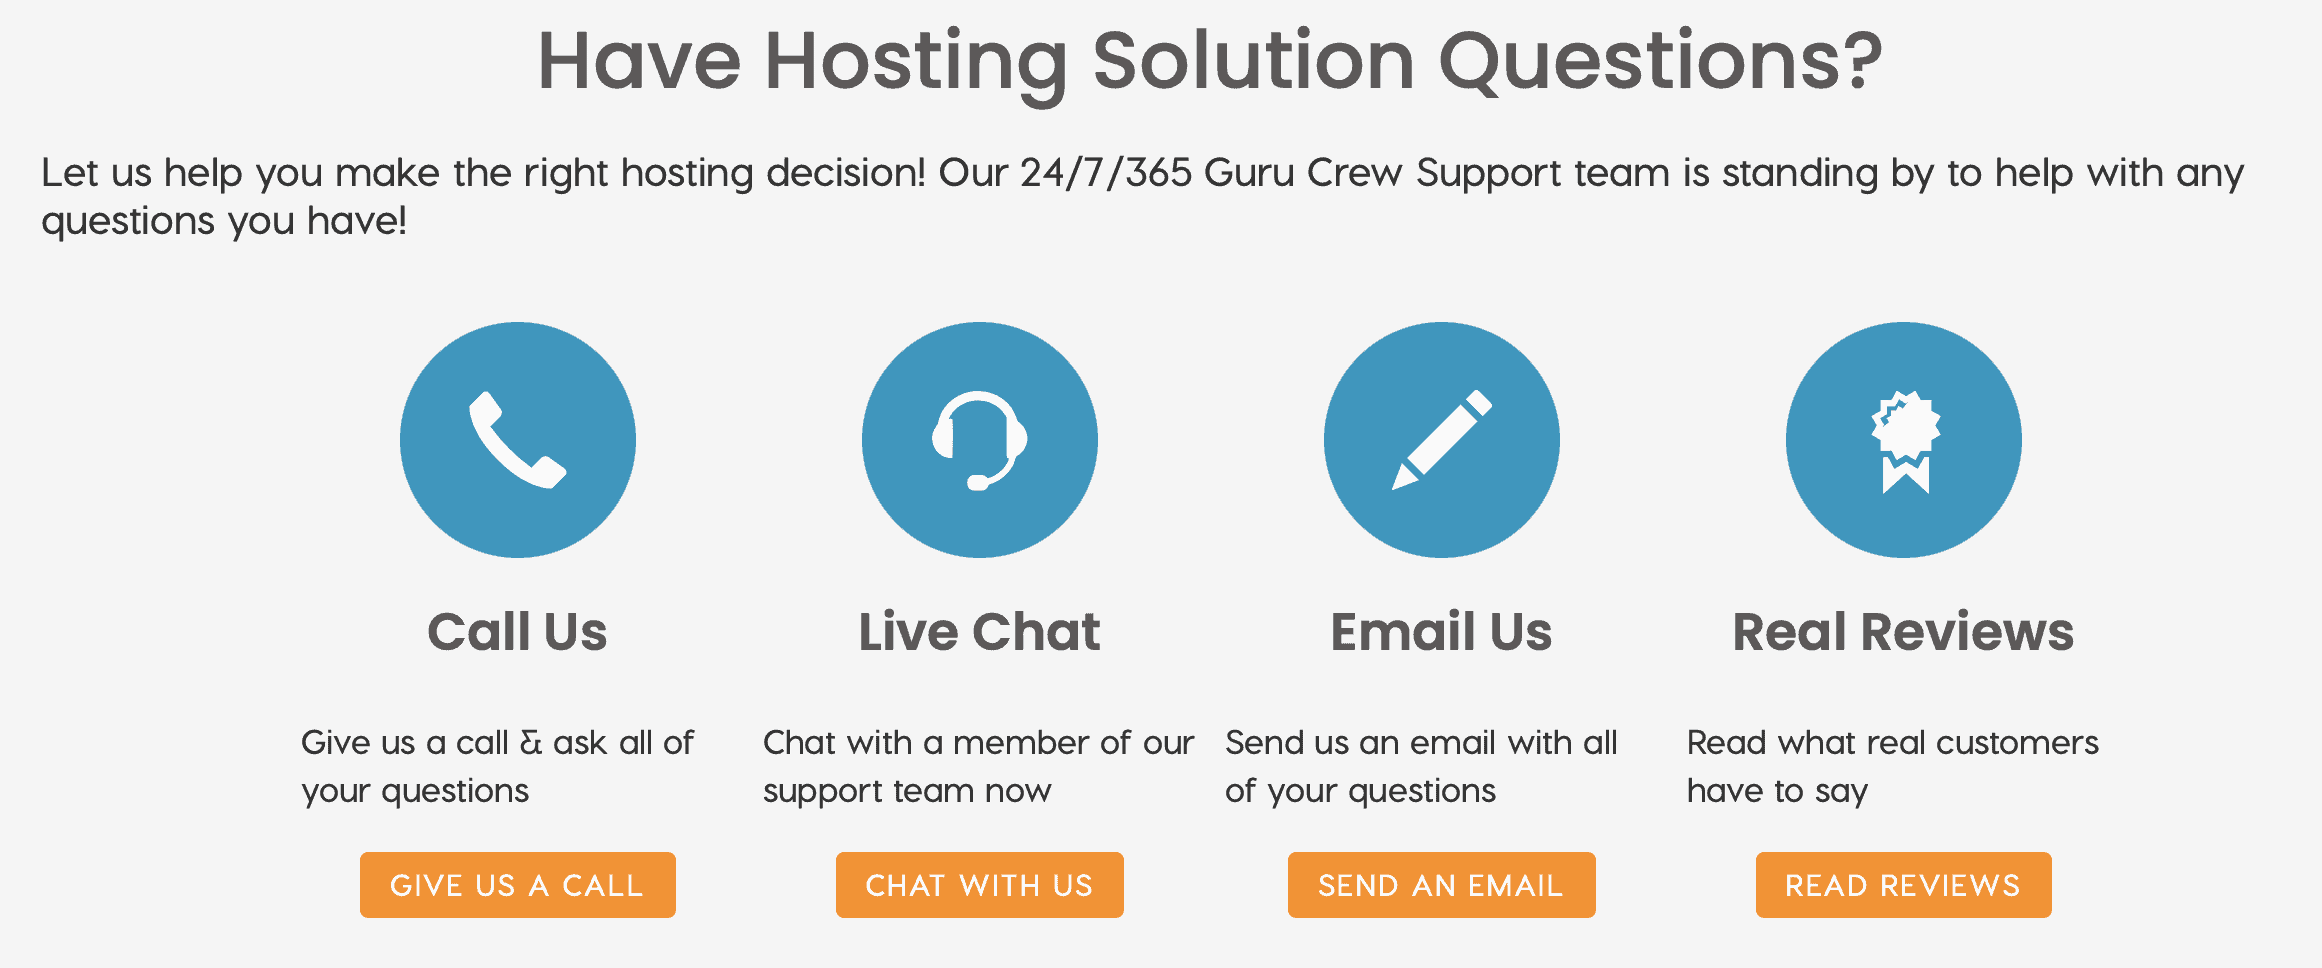 A2 hosting support